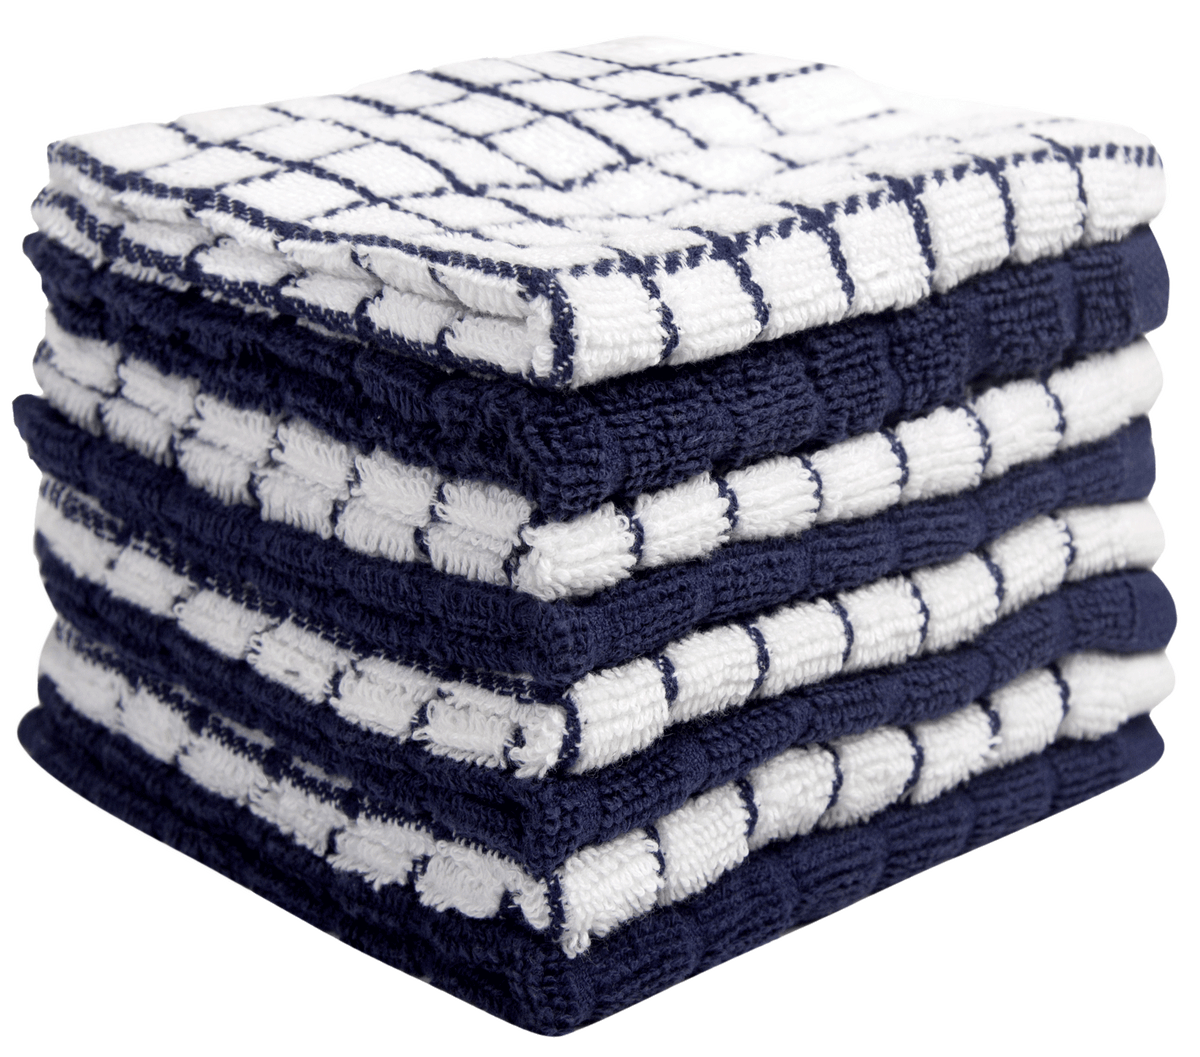 Shop Small Box Yarn Dyed Kitchen Towels: Quality and Style! – Bumble Towels